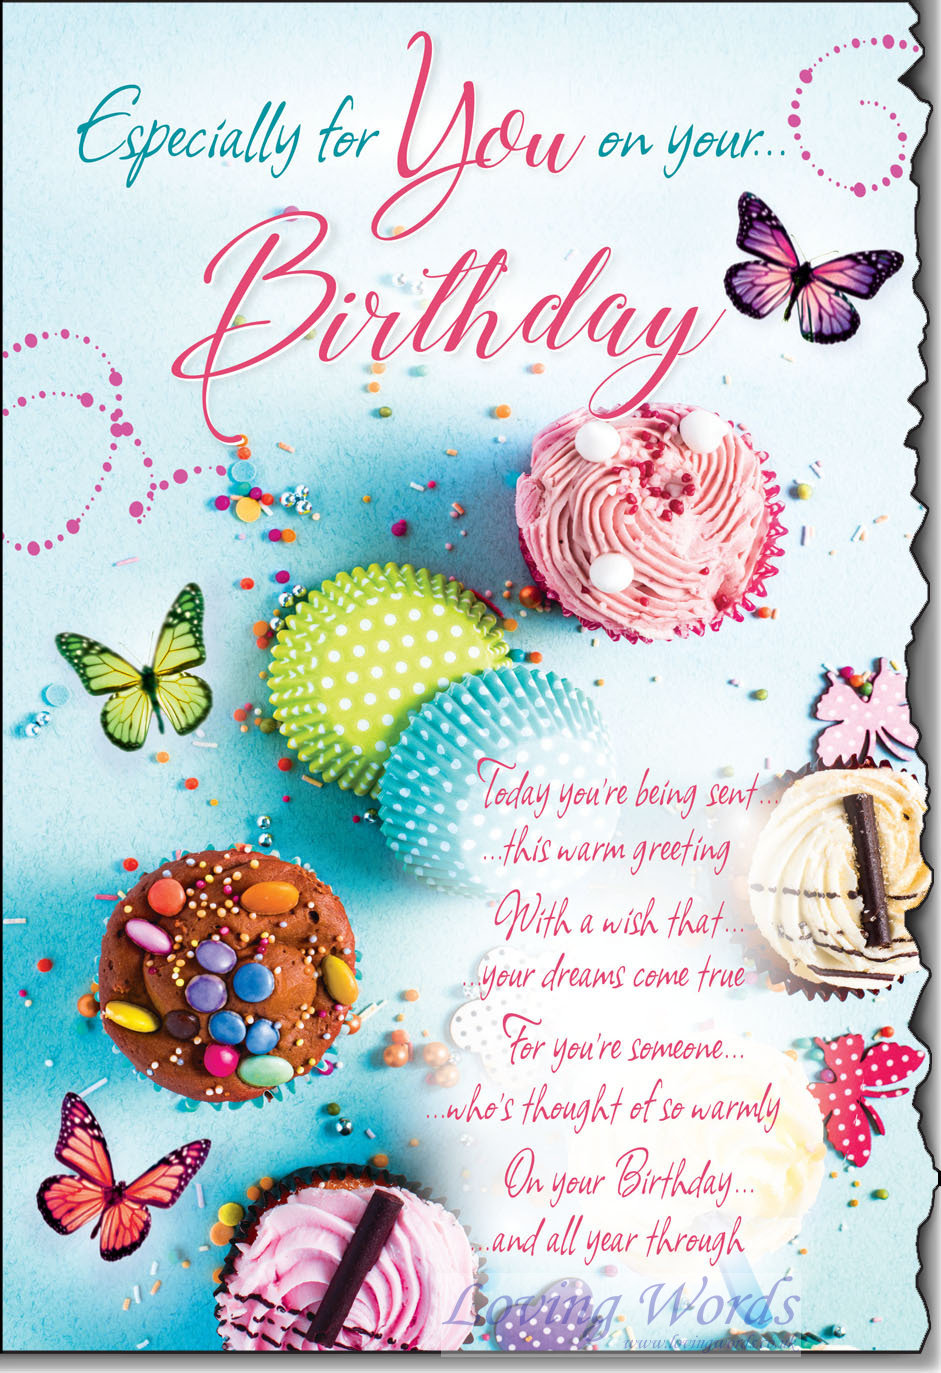 Especially for you Birthday | Greeting Cards by Loving Words